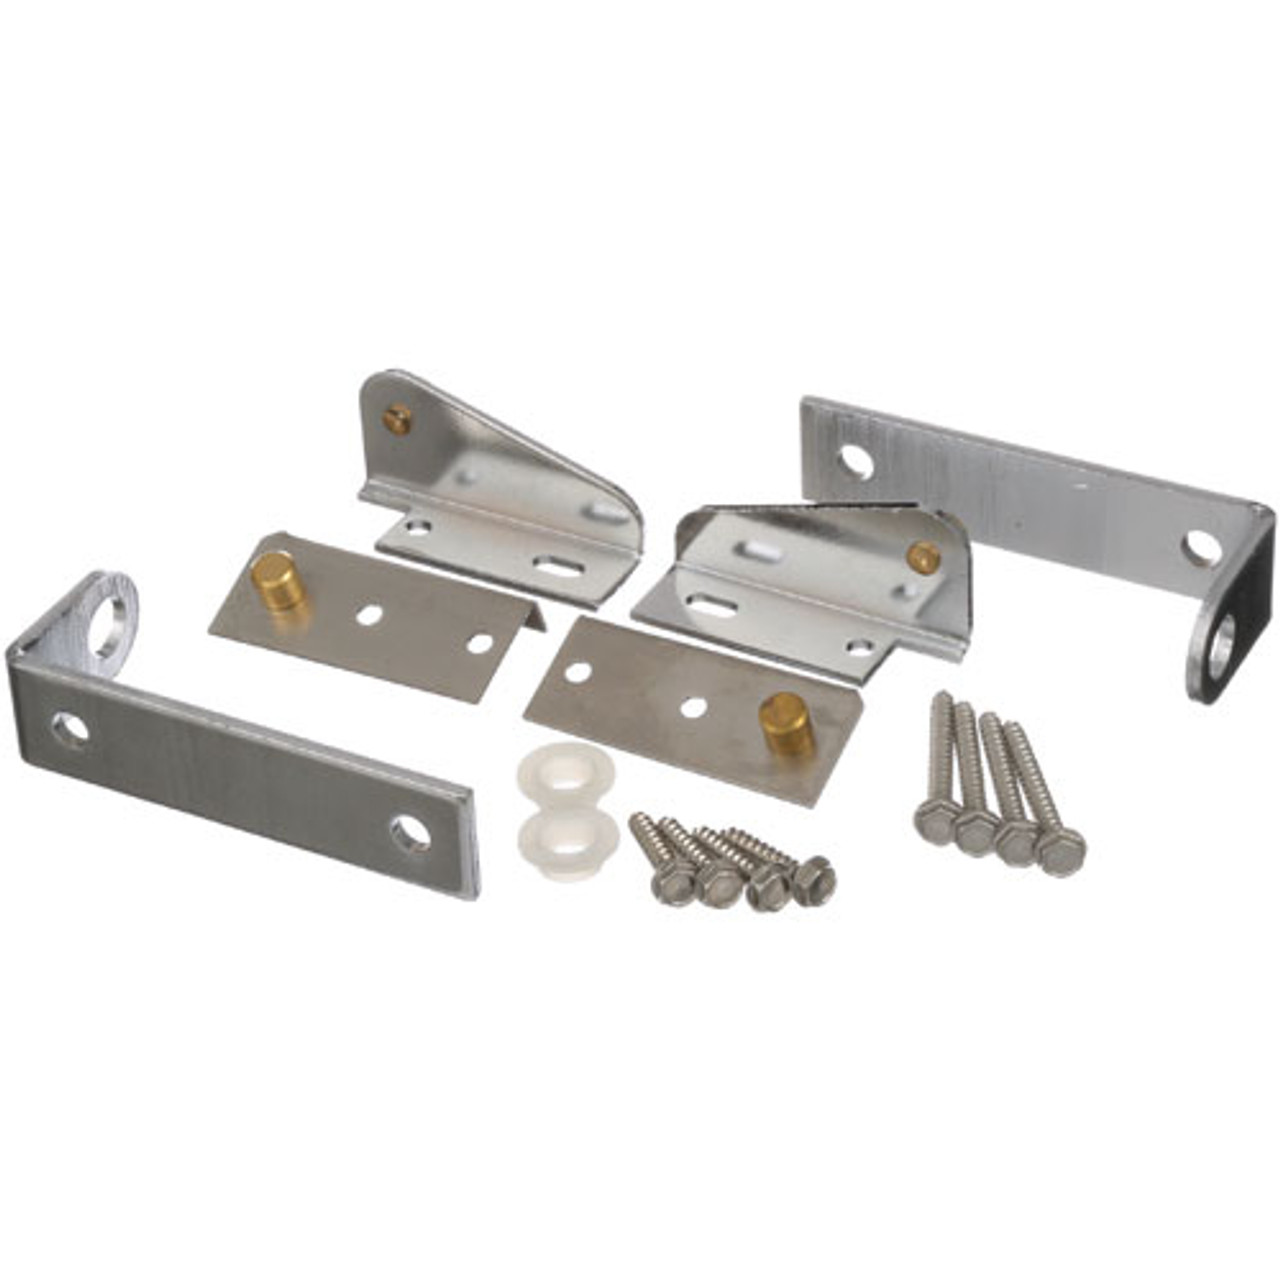 Hinge Kit - Replacement Part For Delfield 420067